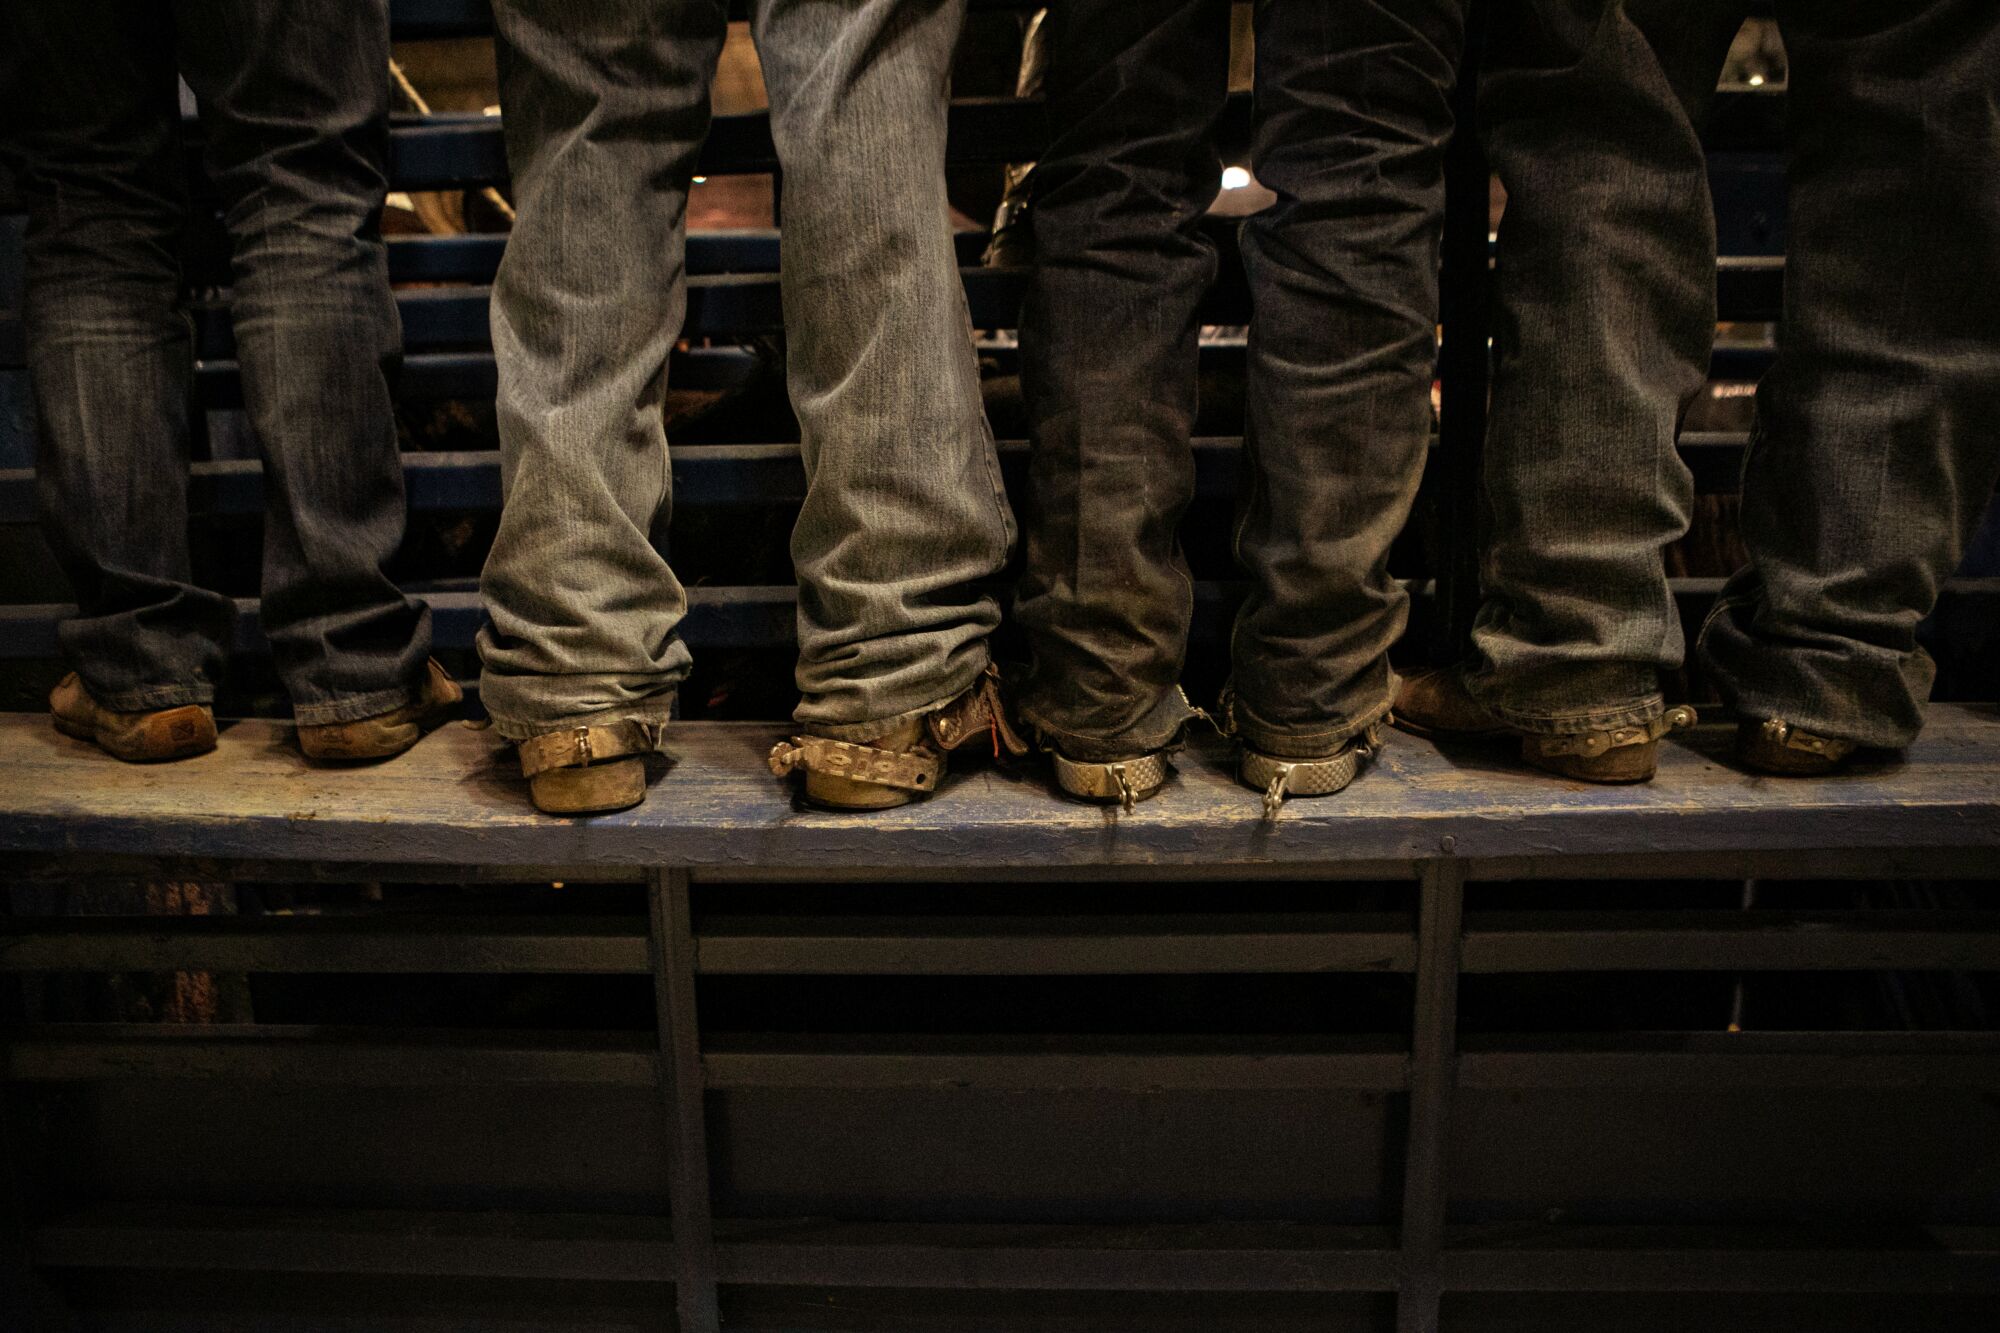 A close shot of four pairs of legs, some with spurs on their heels, standing in a row on a platform